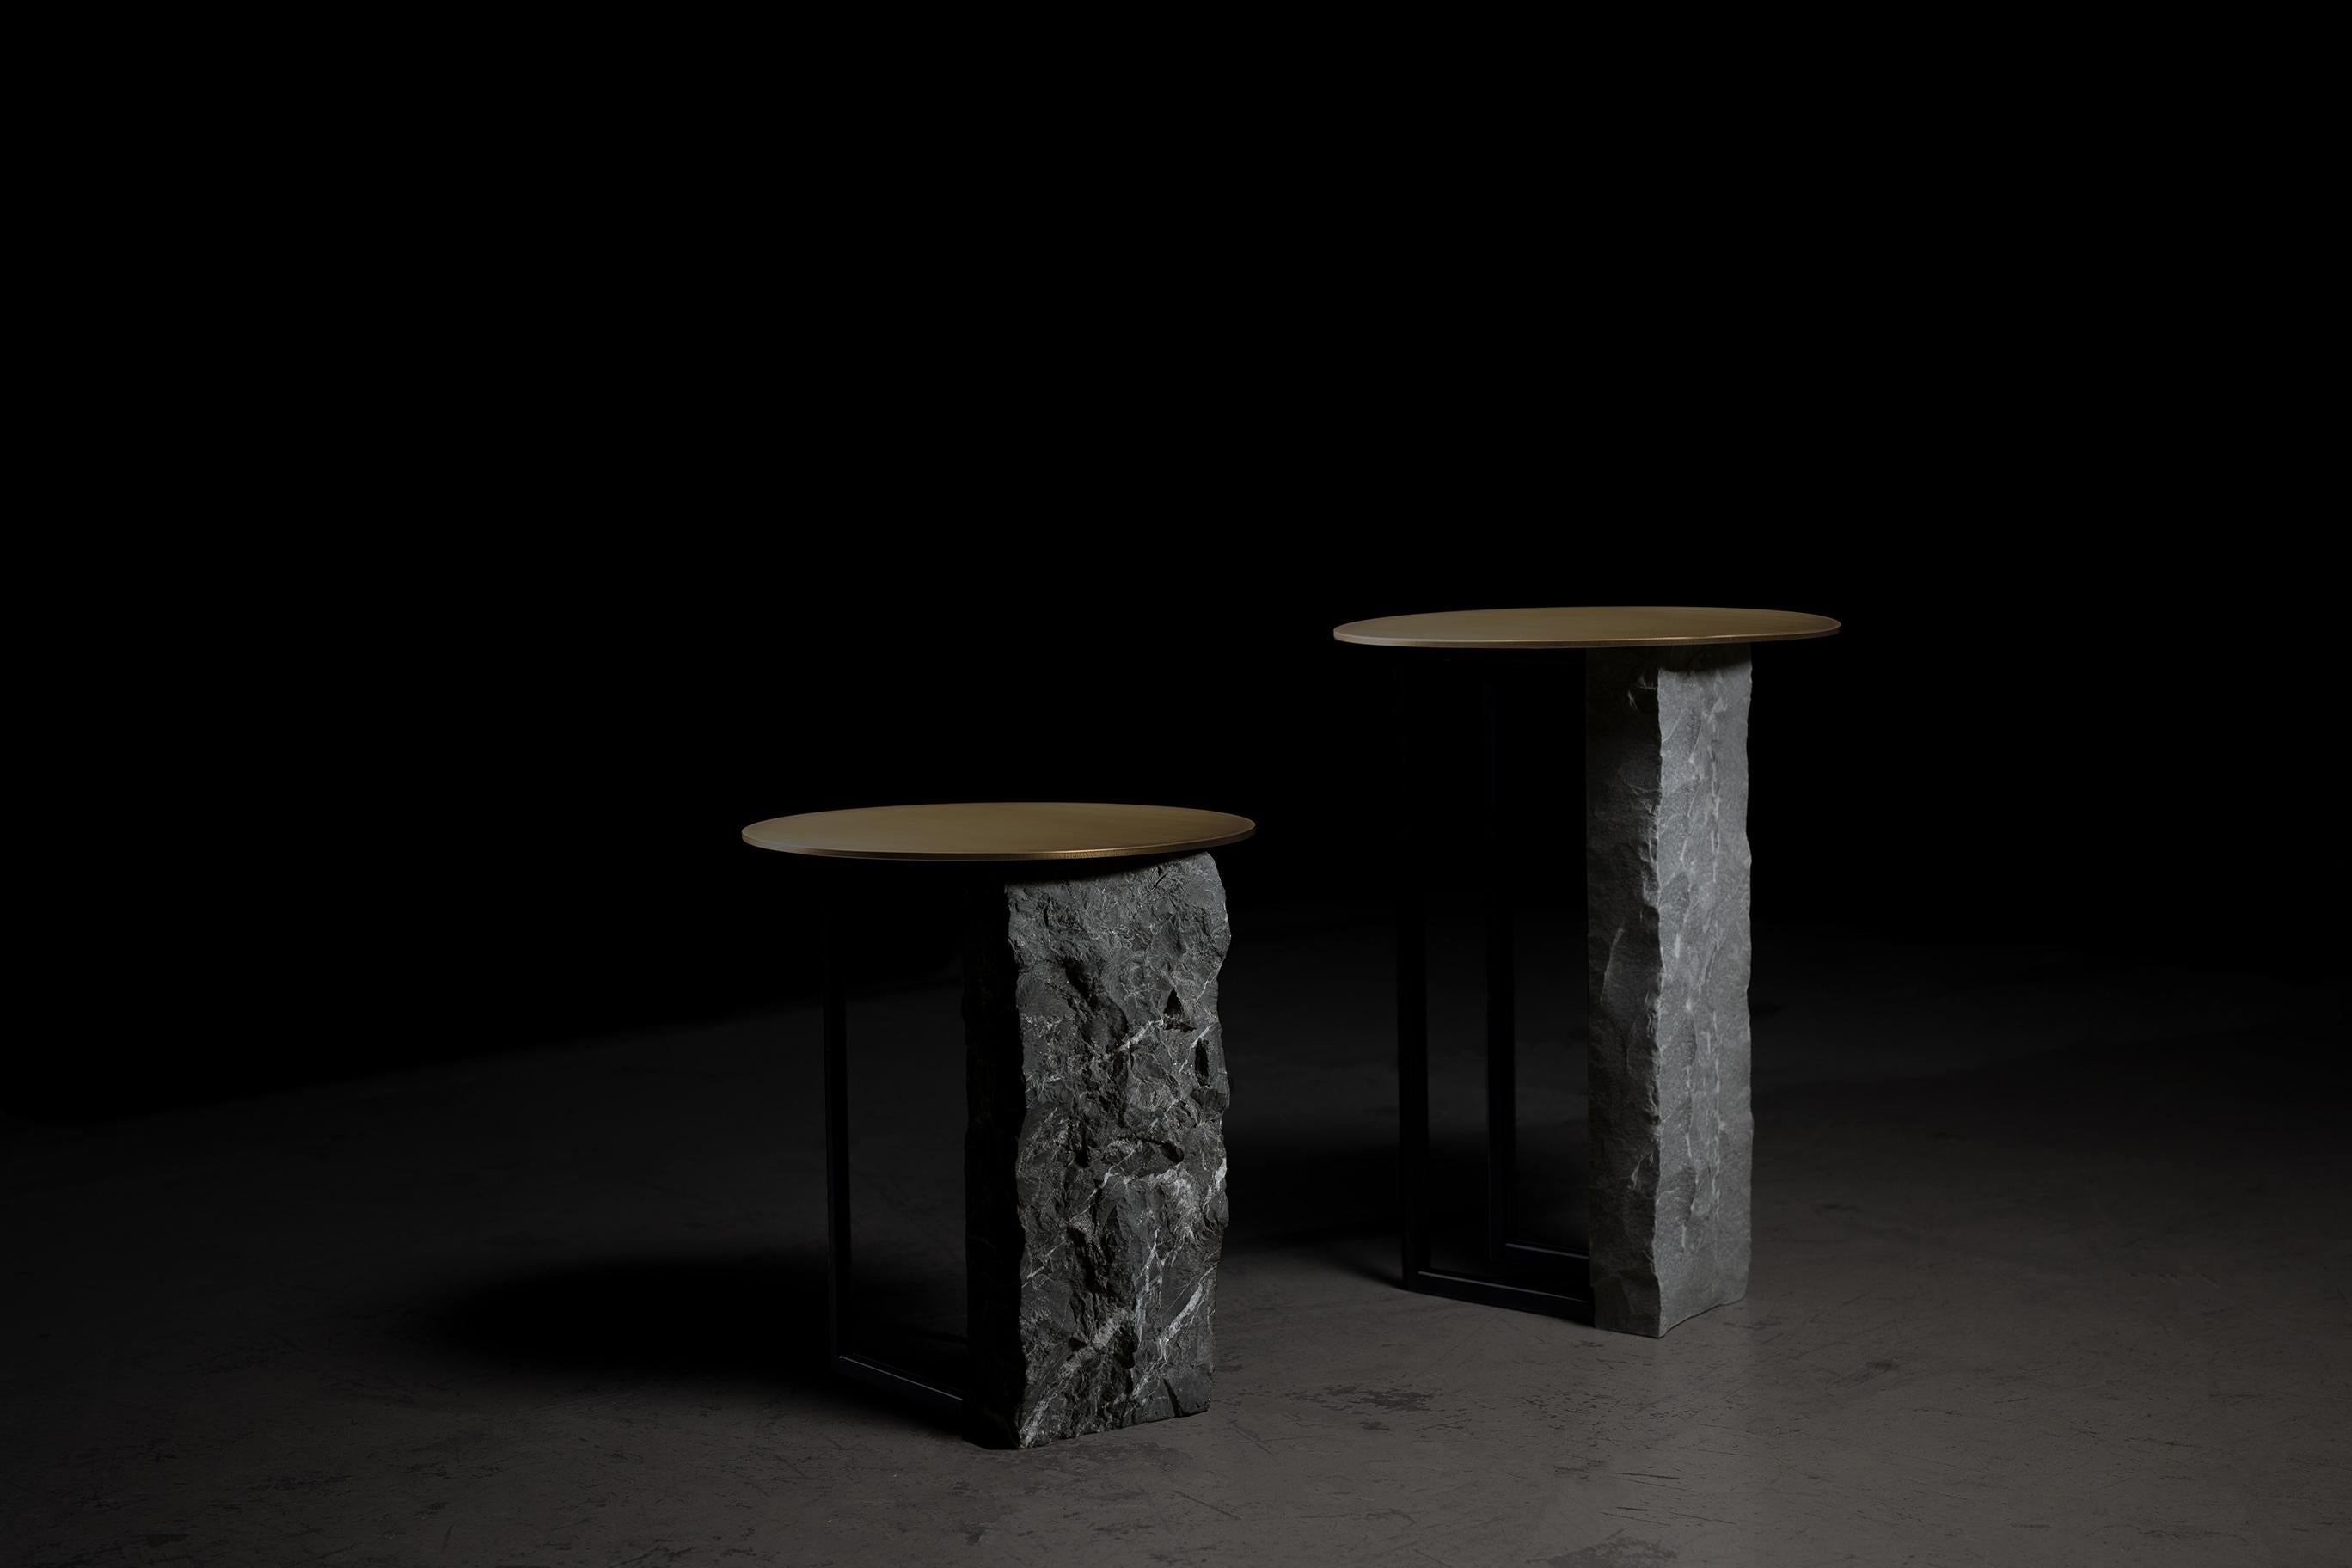 Aire Side Table, Contemporary Collection, Handcrafted in Portugal - Europe by Greenapple.

Designed by Rute Martins for the Contemporary Collection, the Aire marble side table features a bold and distinctive design, seamlessly complementing